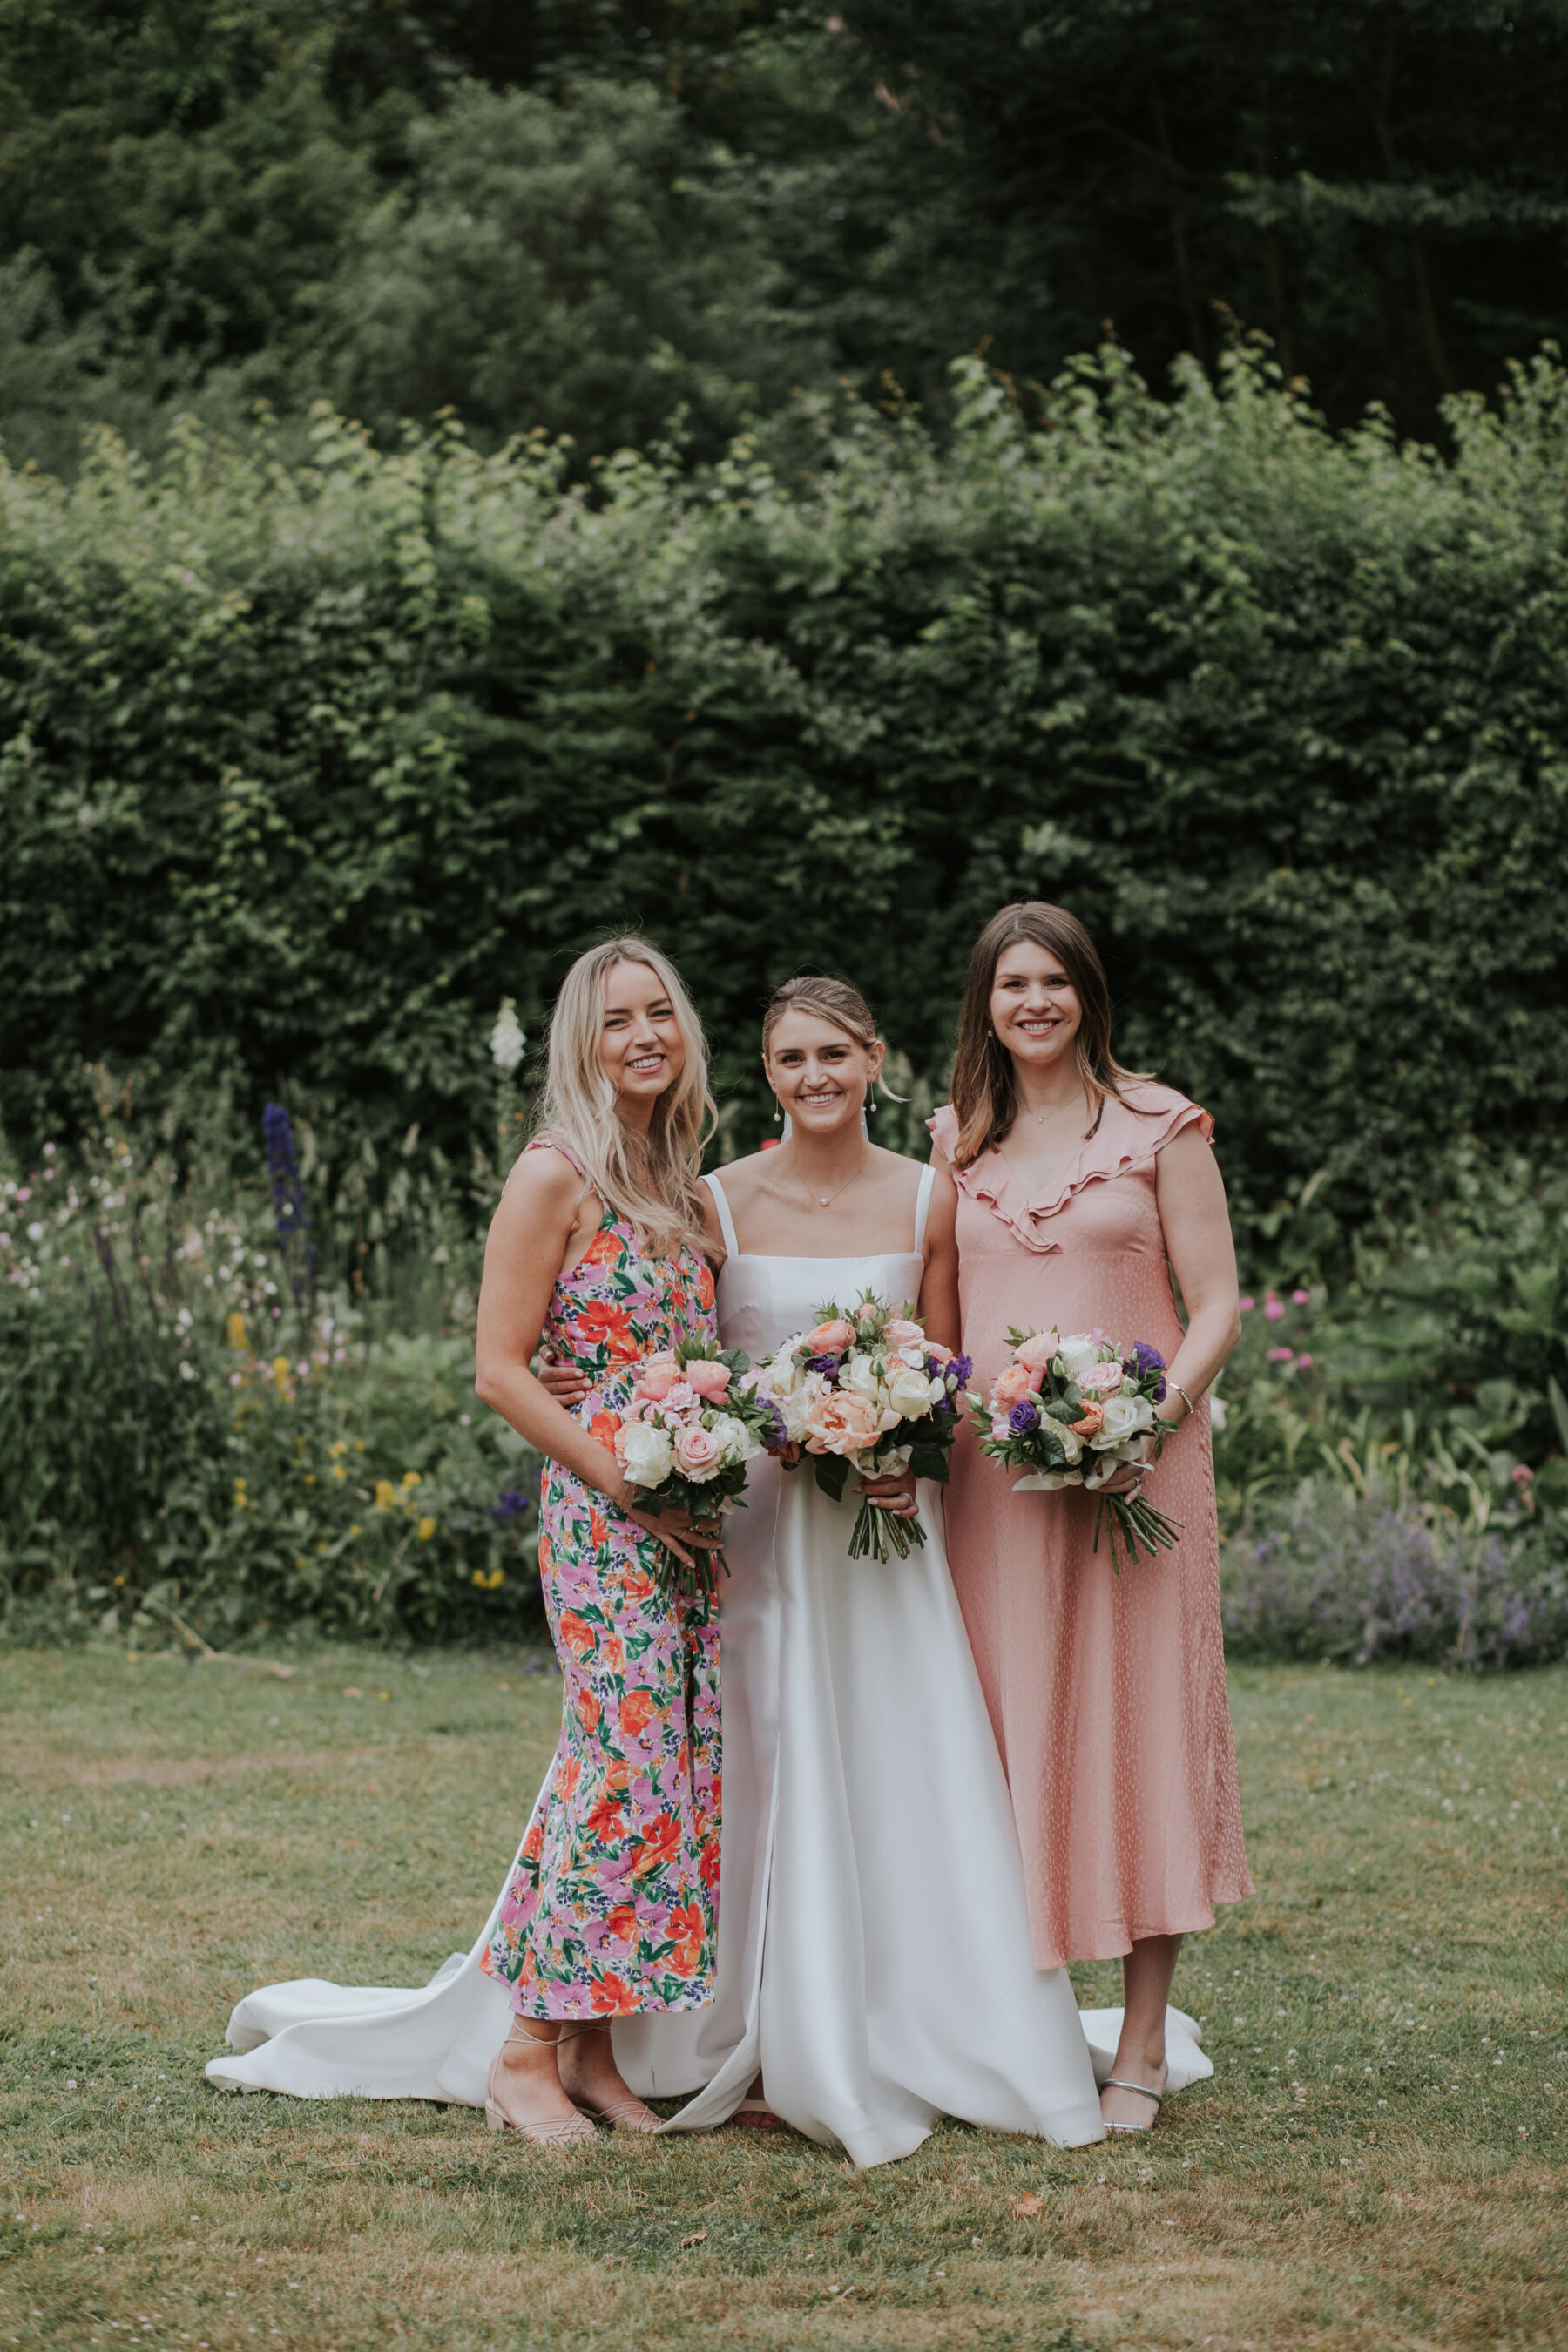 Bride in a Khya wedding dress standing on the grass with a bridesmaid in pink and floral dresses standing either side of her.